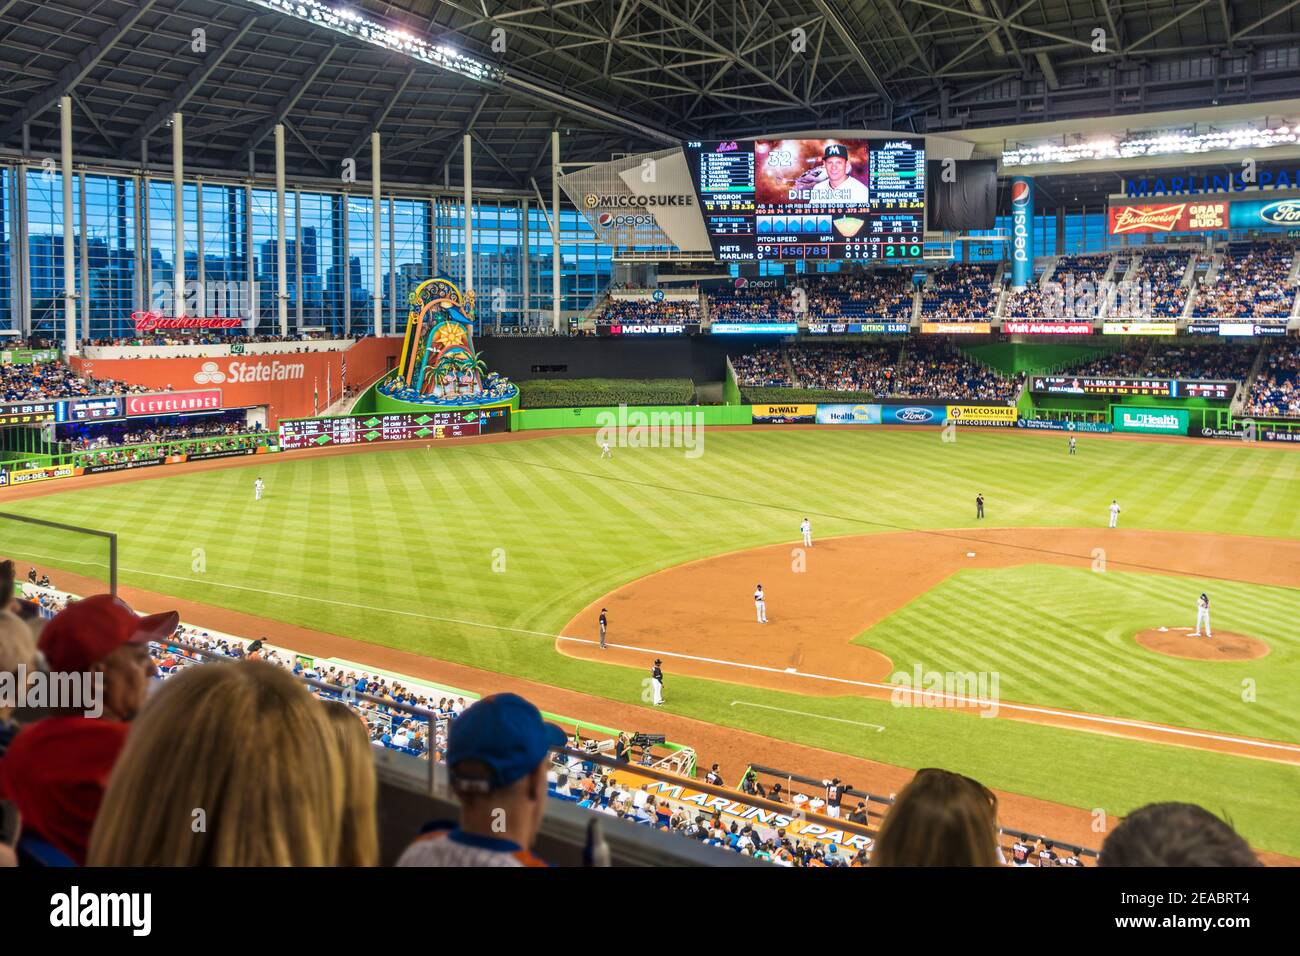 The Marlins play the Mets at Miami's Marlin Park. Stock Photo